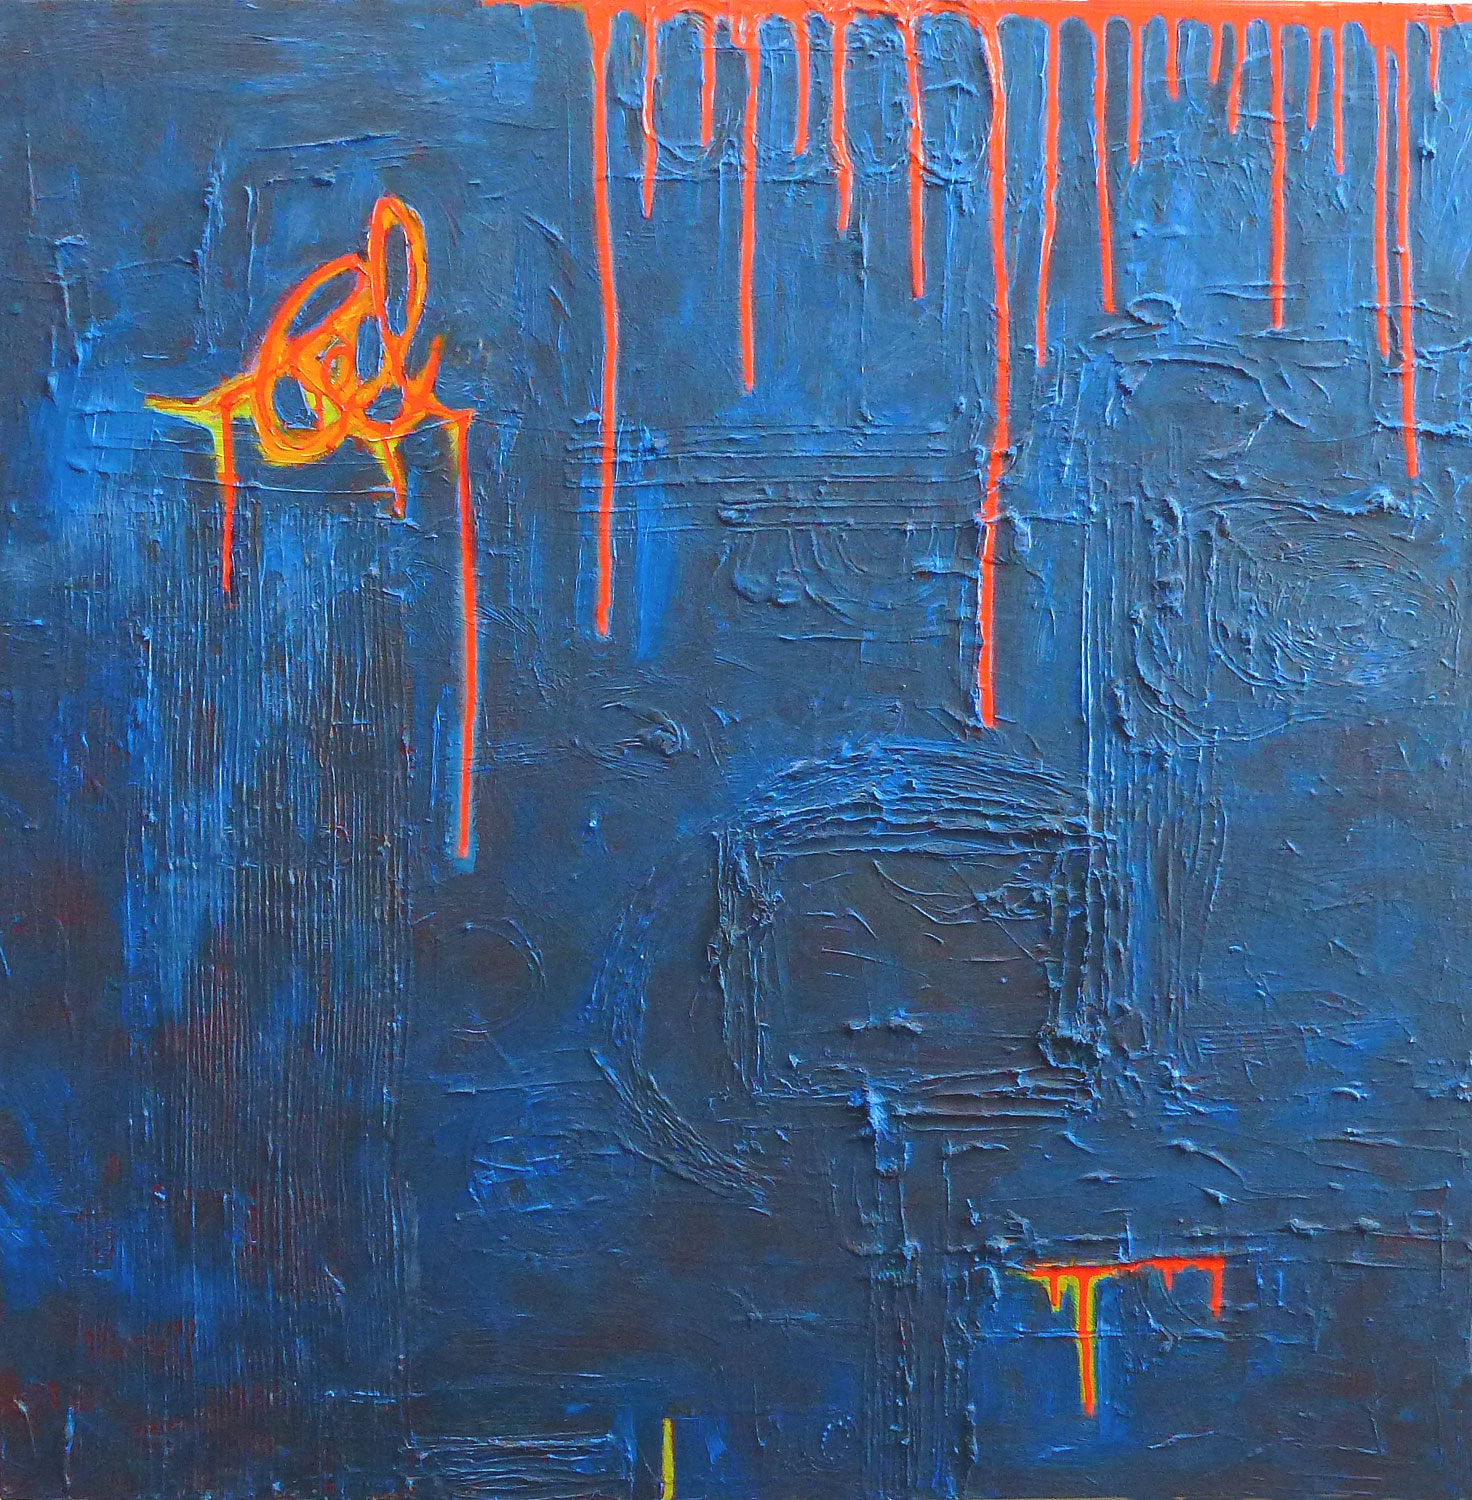  My Prints are on This 2.0  2012 | oil on canvas | 36 x 36 | $2100 